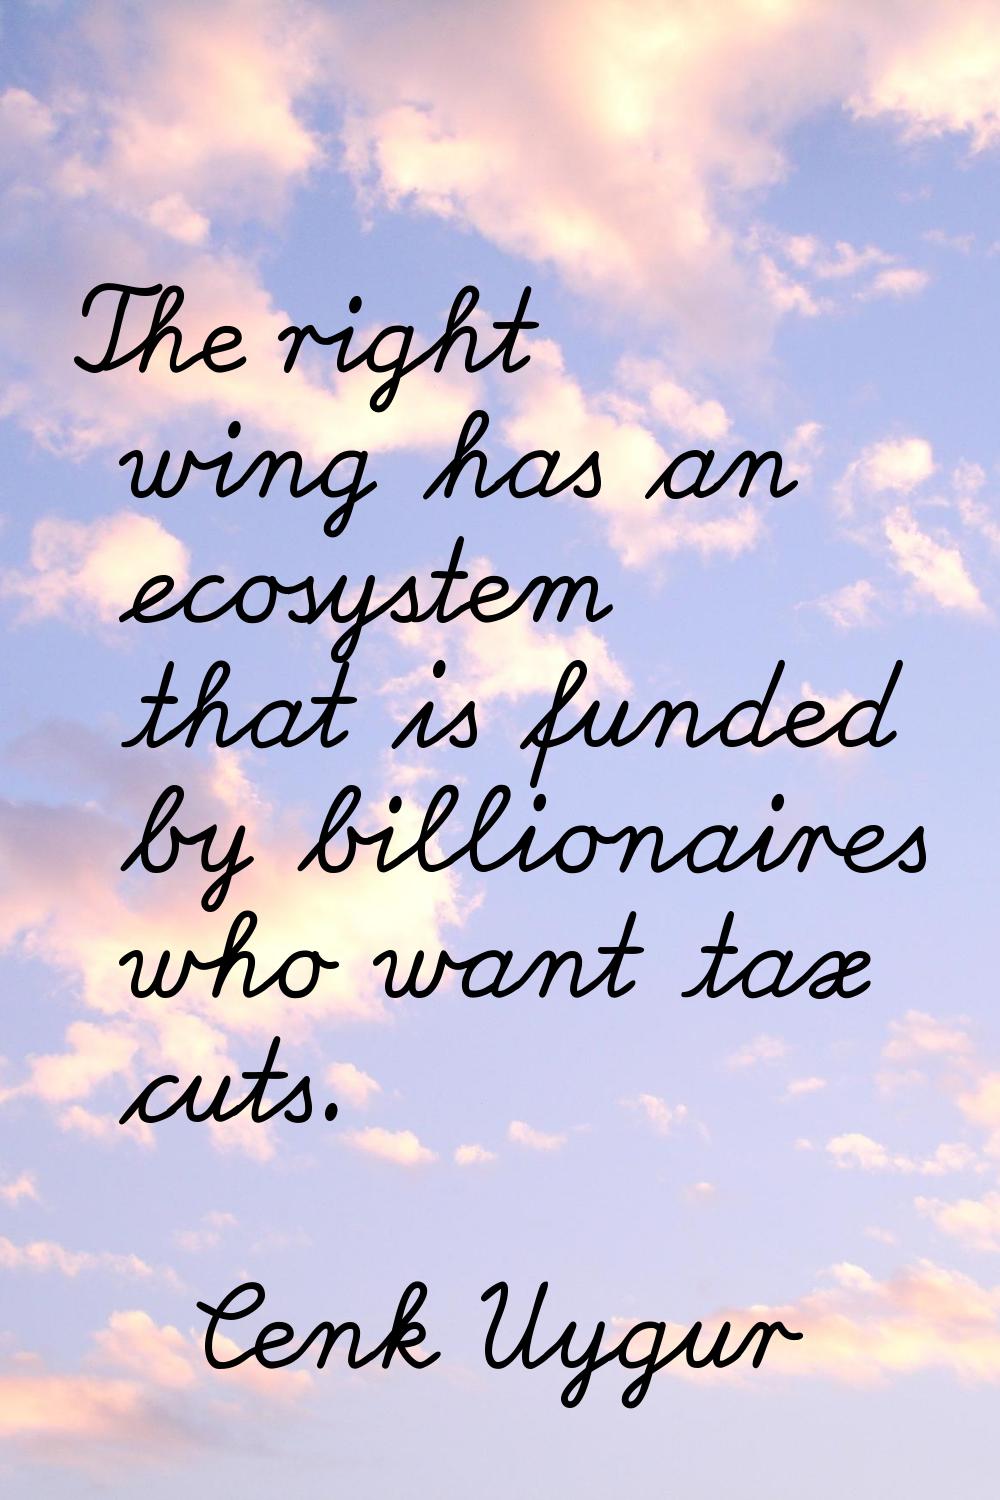 The right wing has an ecosystem that is funded by billionaires who want tax cuts.